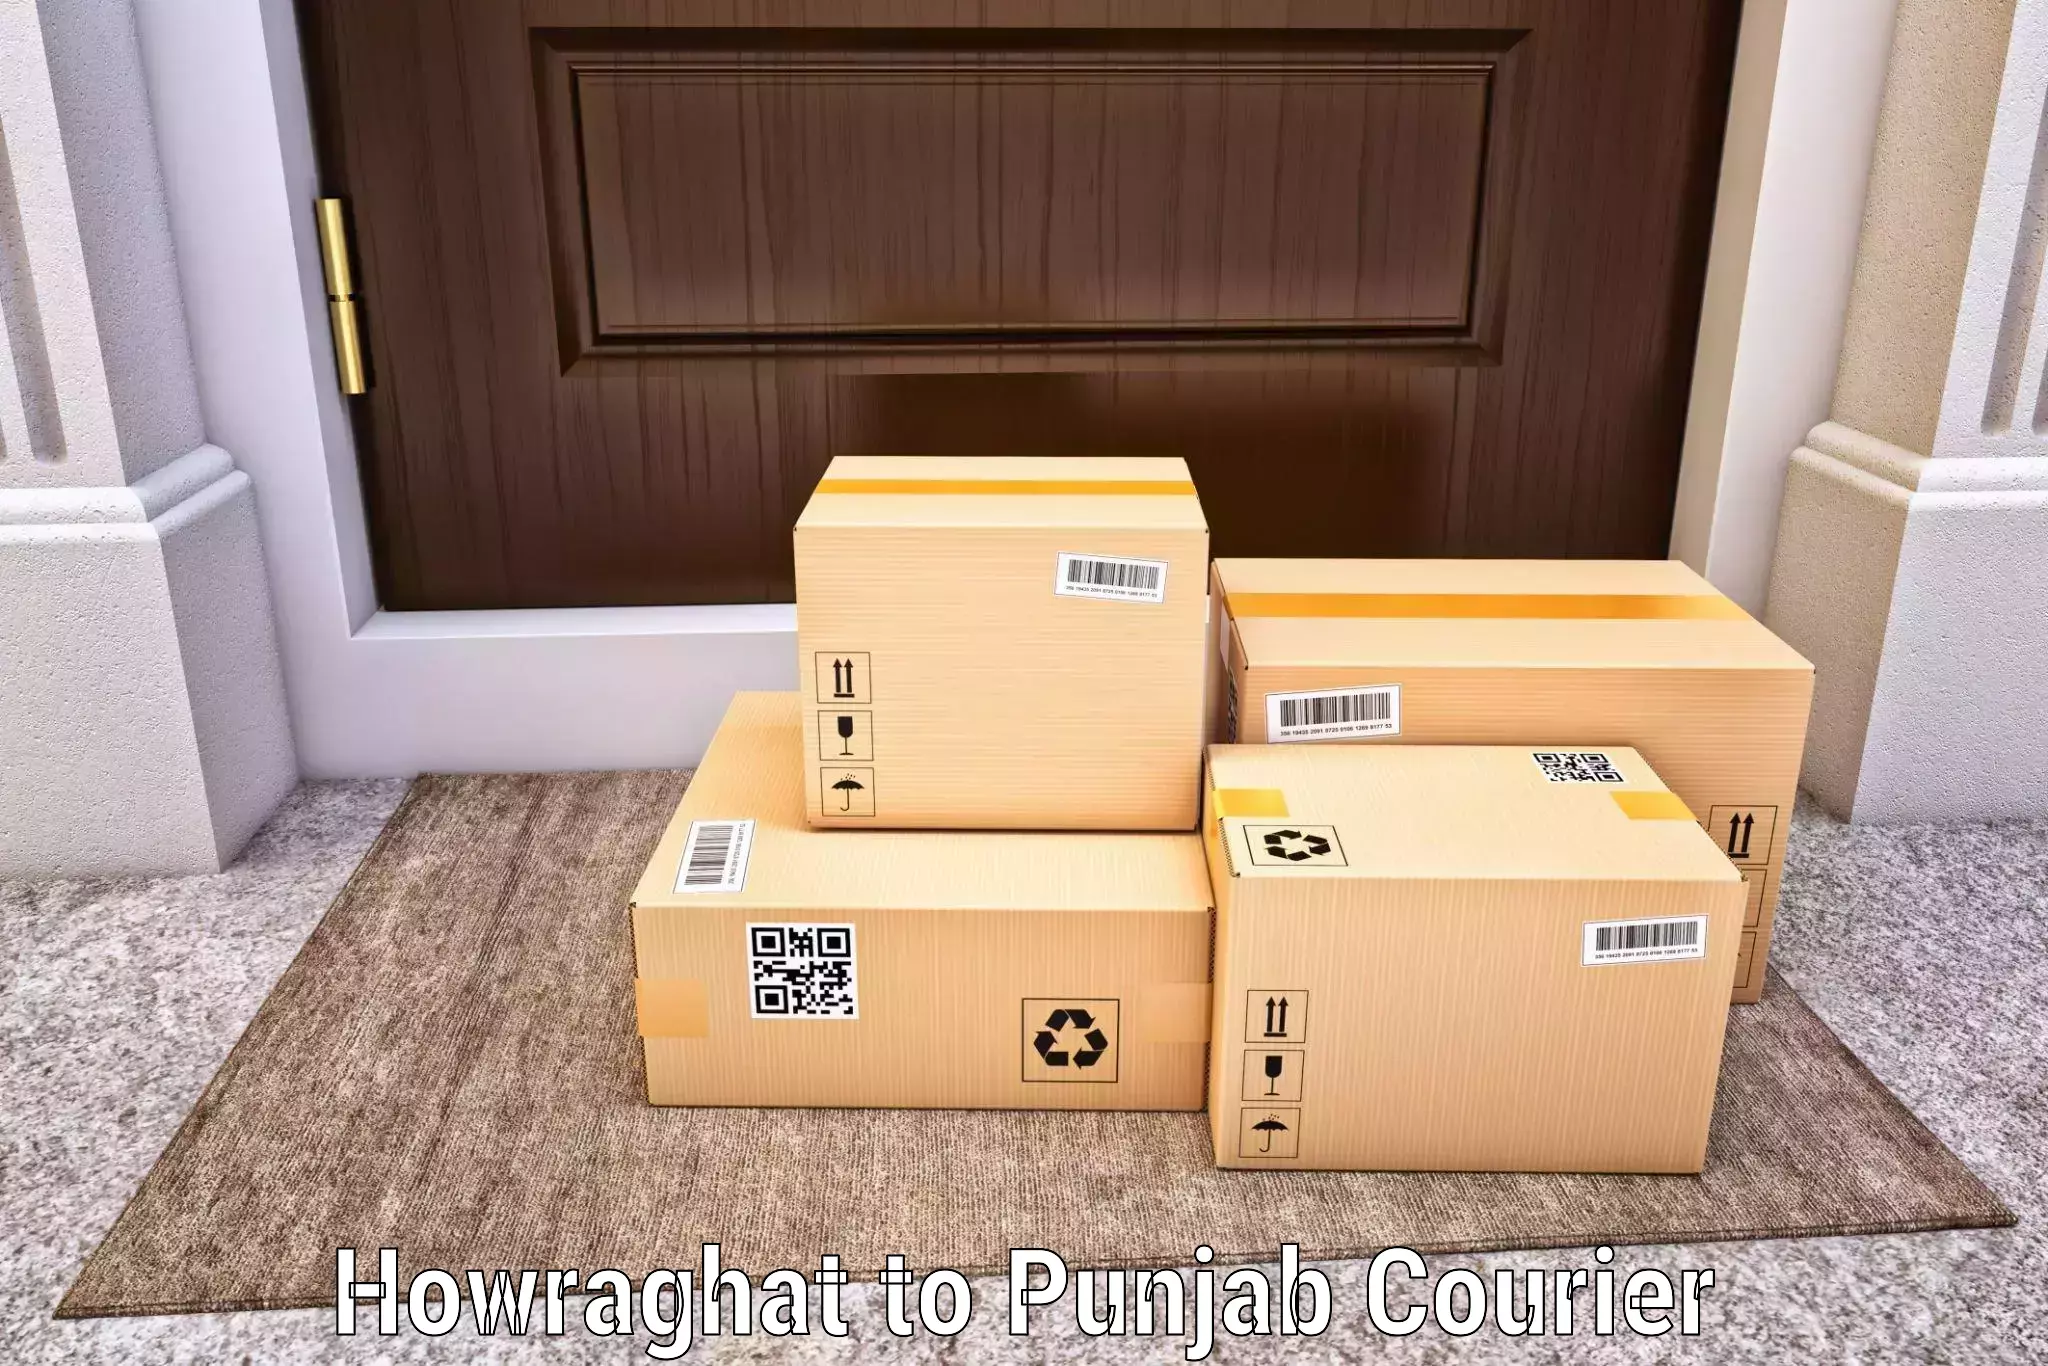 Express package delivery Howraghat to Ludhiana